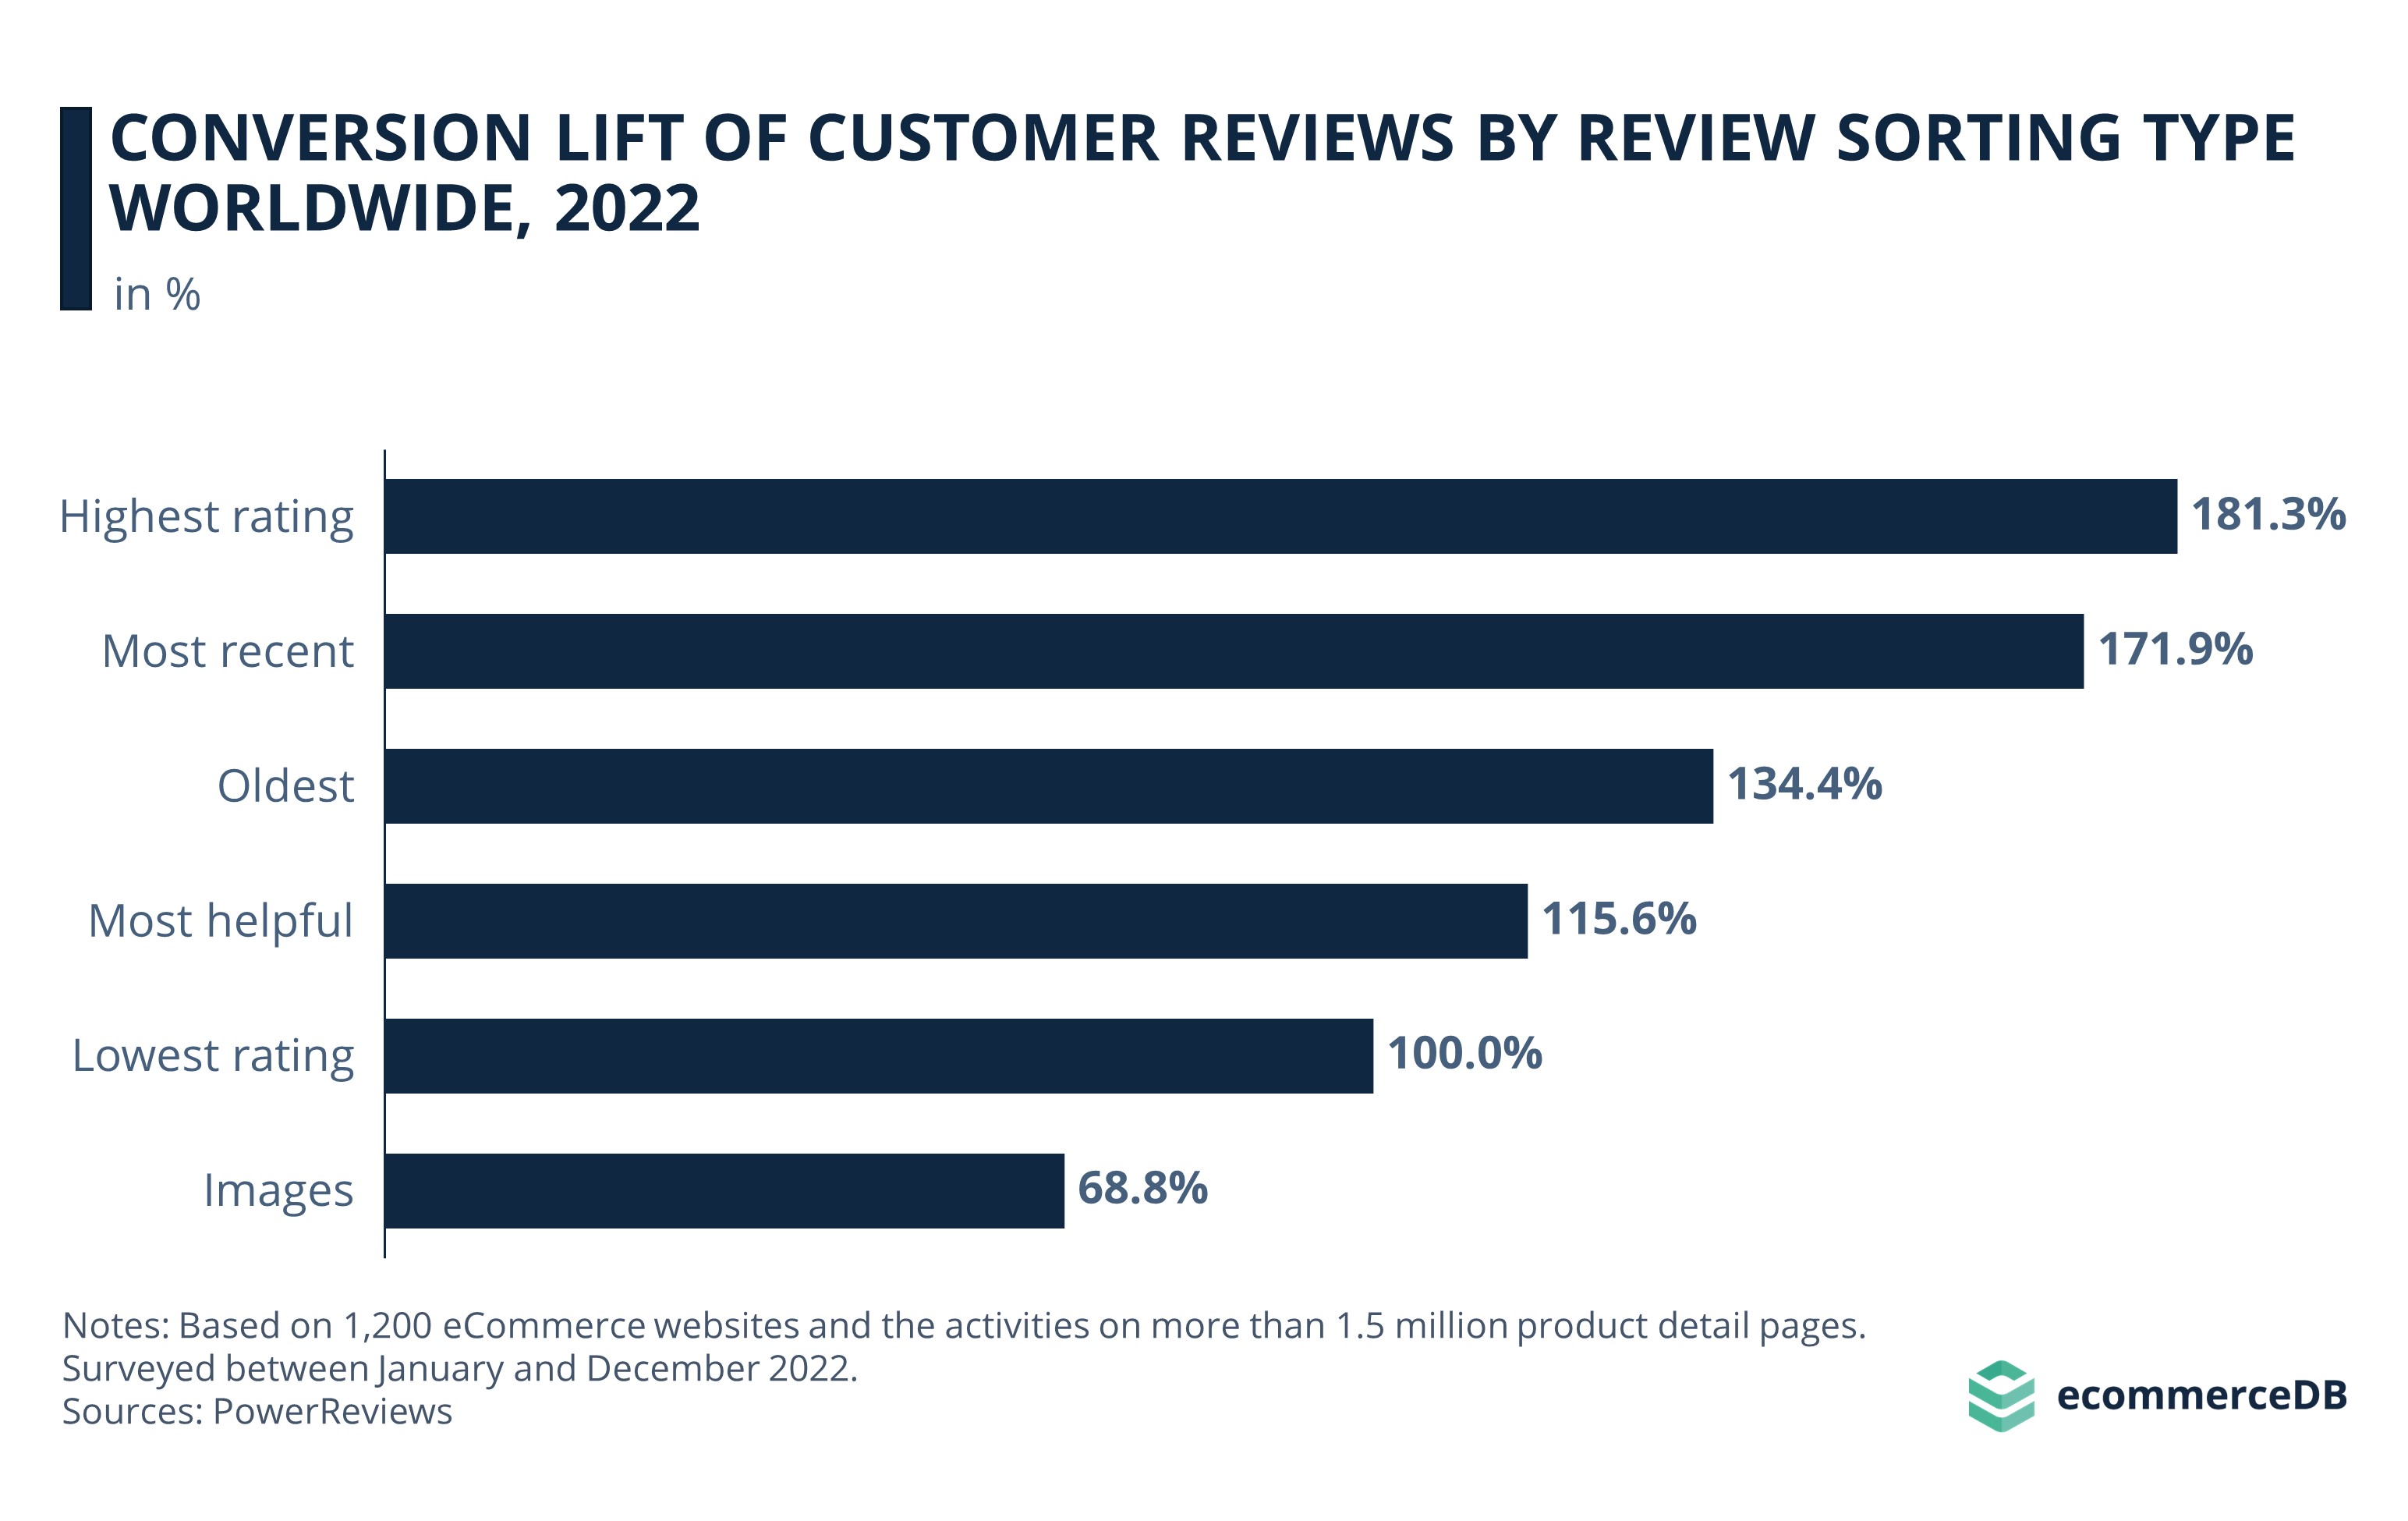 Conversion Lift of Customer Reviews by Review Sorting Type Worldwide, 2022